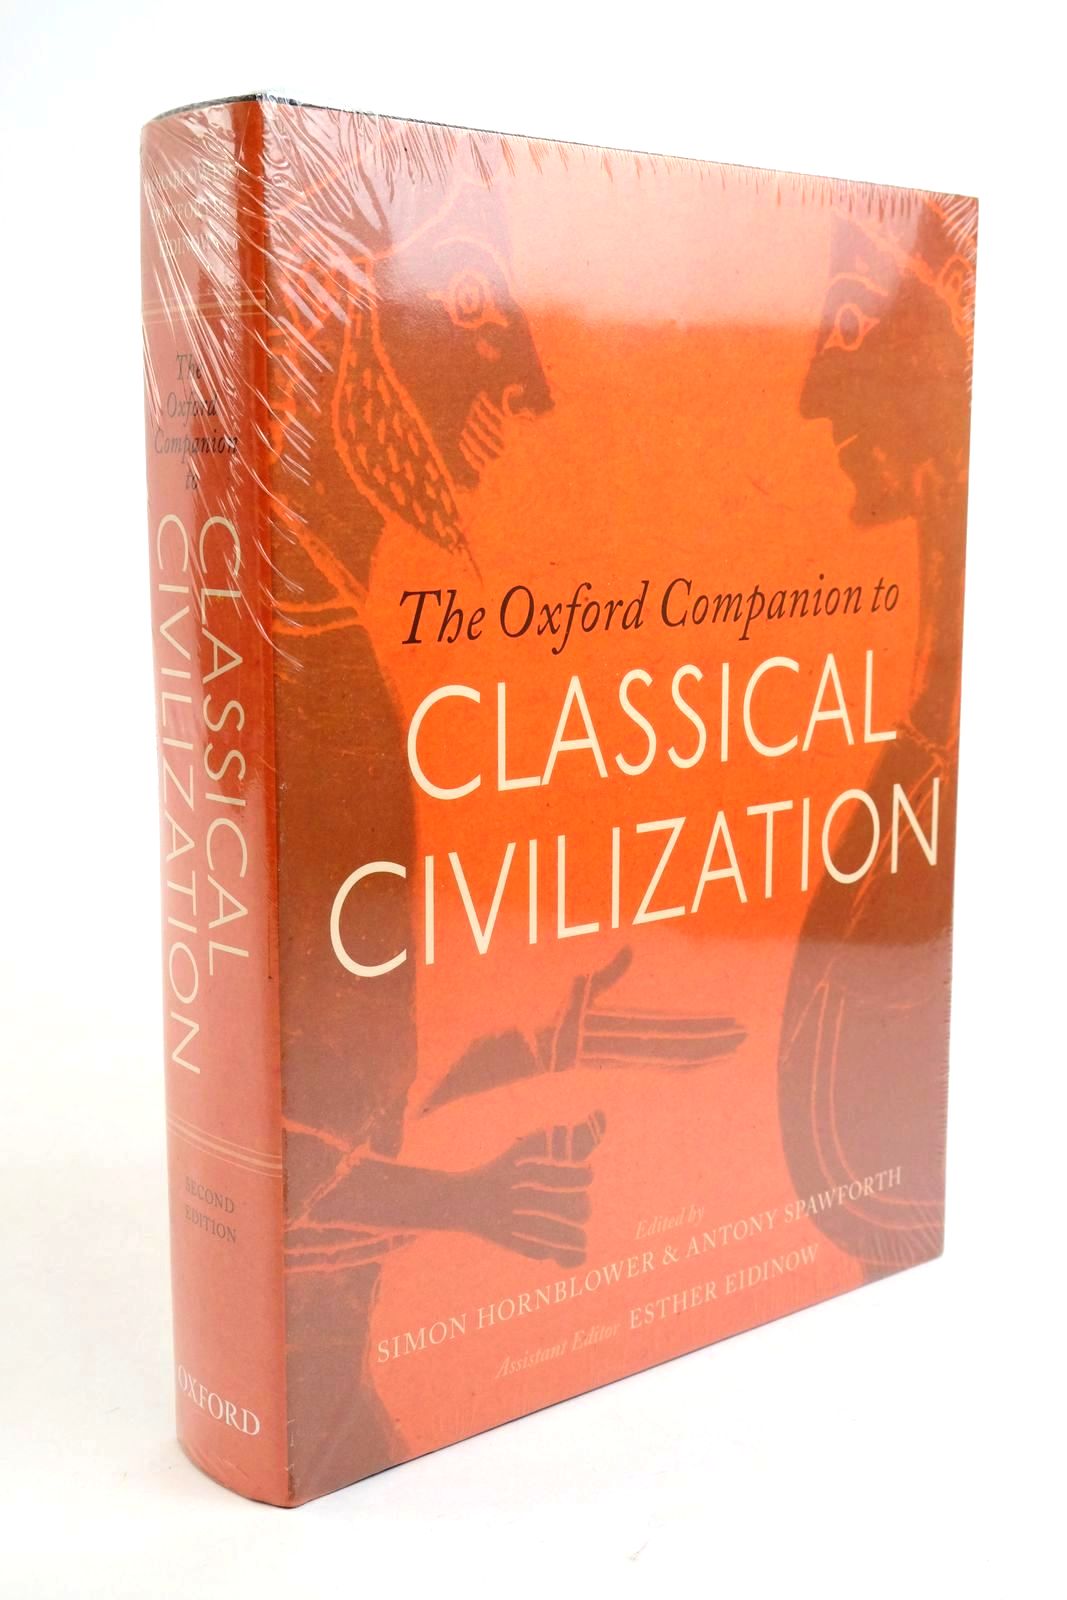 Photo of THE OXFORD COMPANION TO CLASSICAL CIVILIZATION written by Hornblower, Simon Spawforth, Antony published by Oxford University Press (STOCK CODE: 1322326)  for sale by Stella & Rose's Books